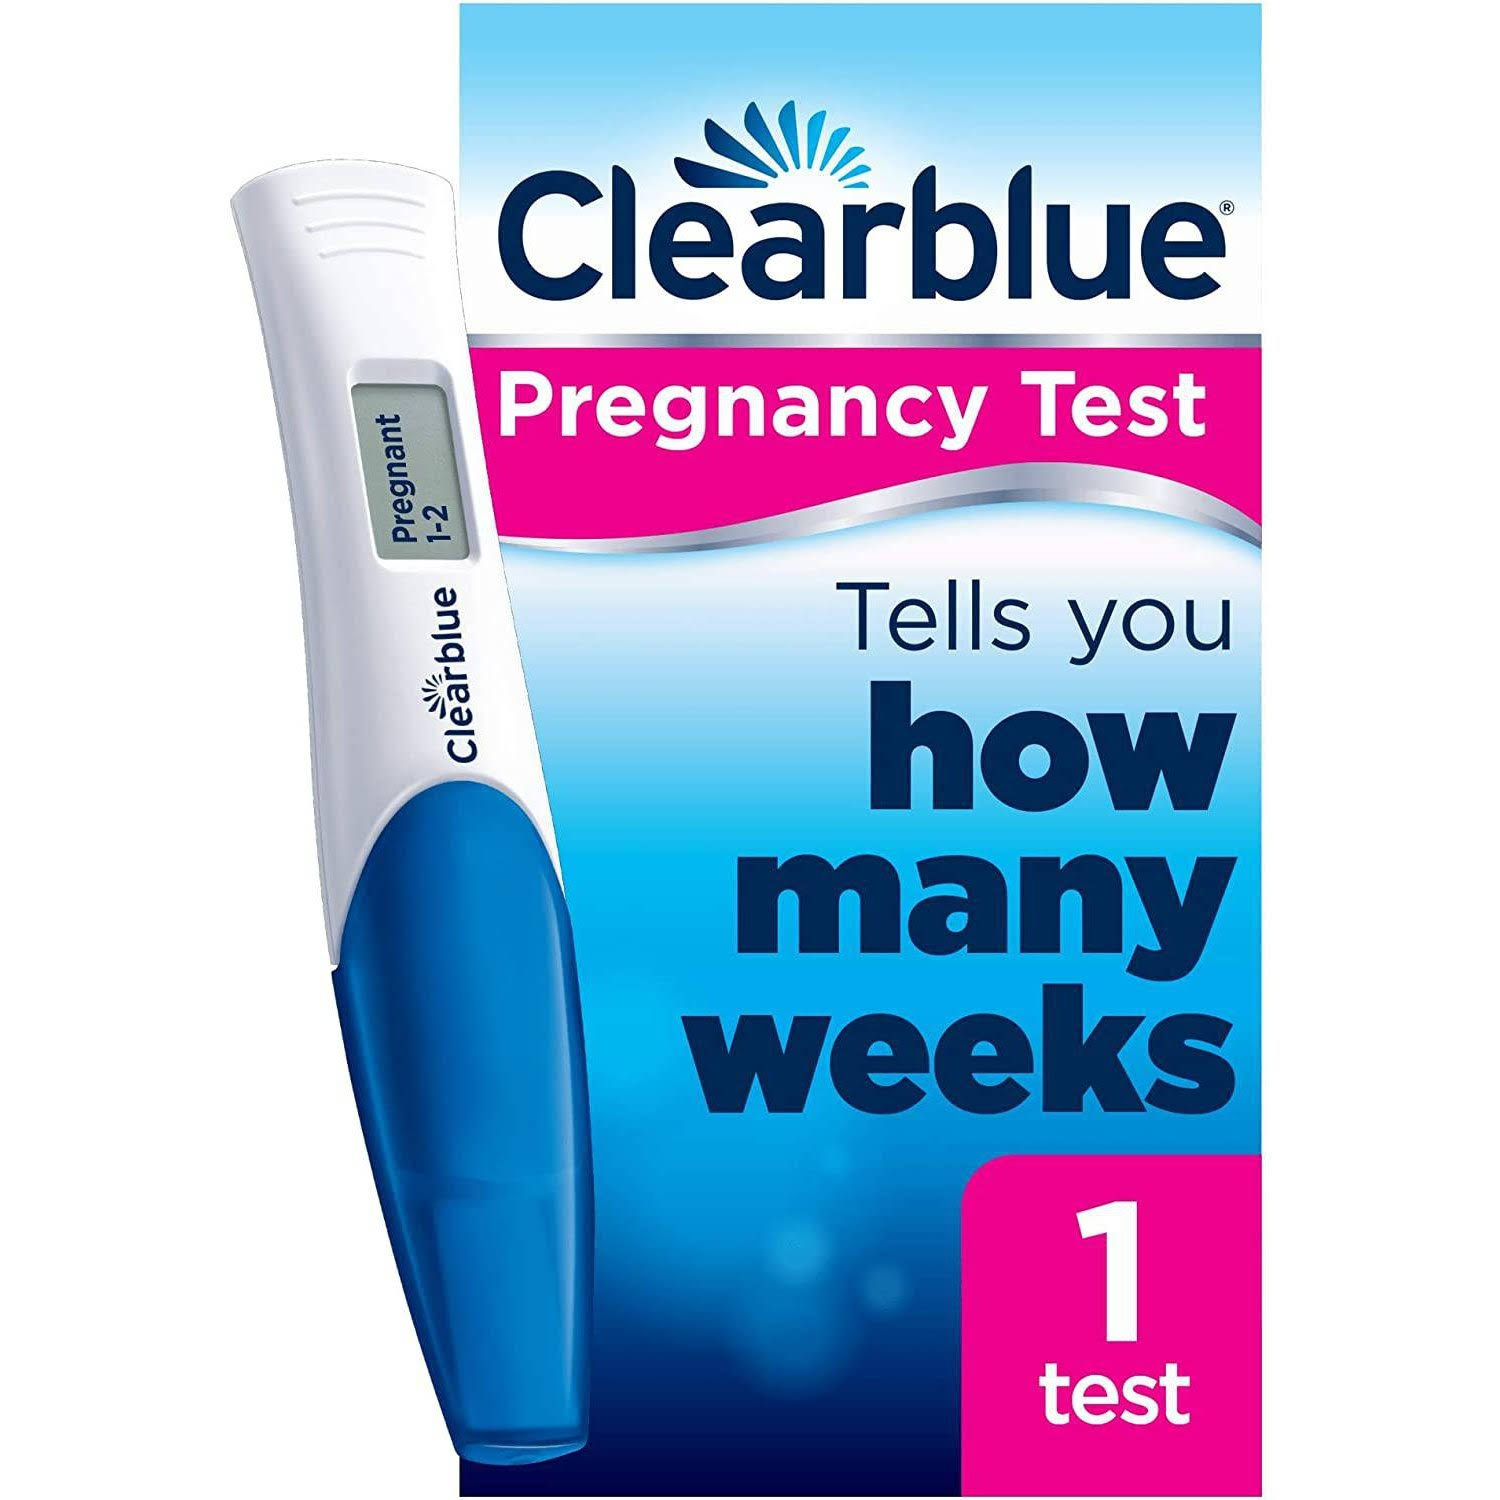 Clearblue Pregnancy Digital Test Kit - With Weeks Indicator